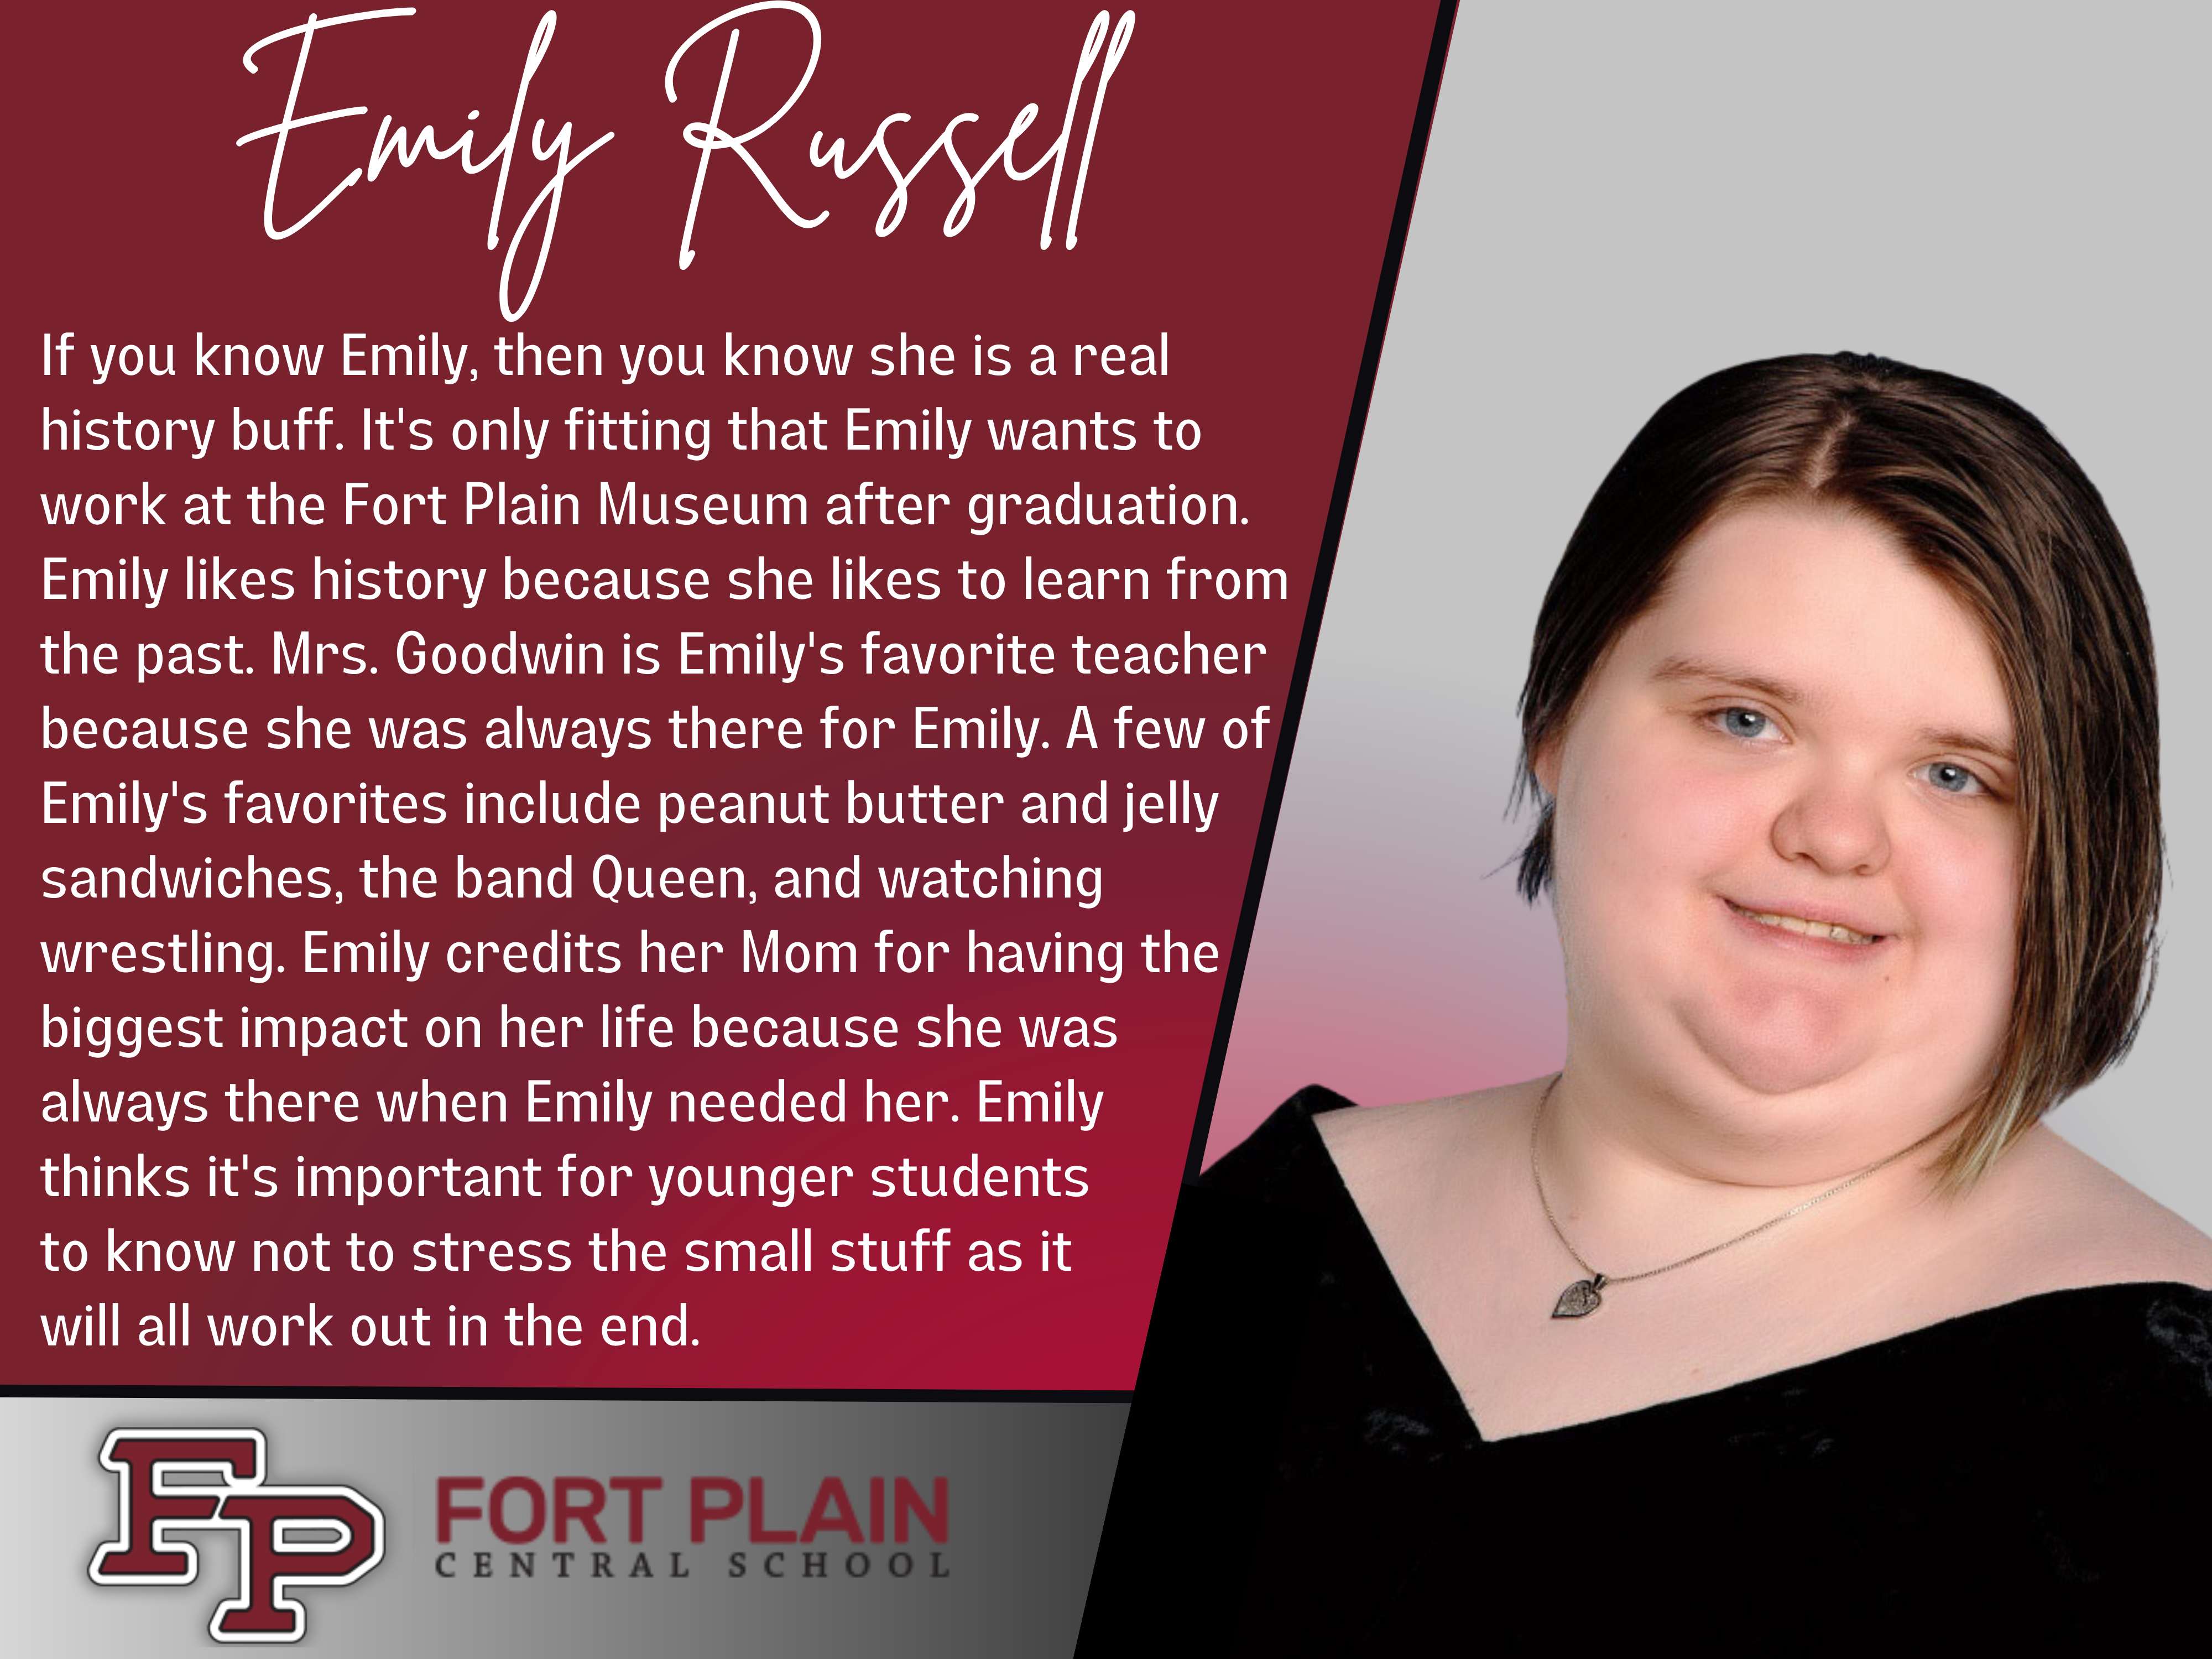 photo of and info about Emily